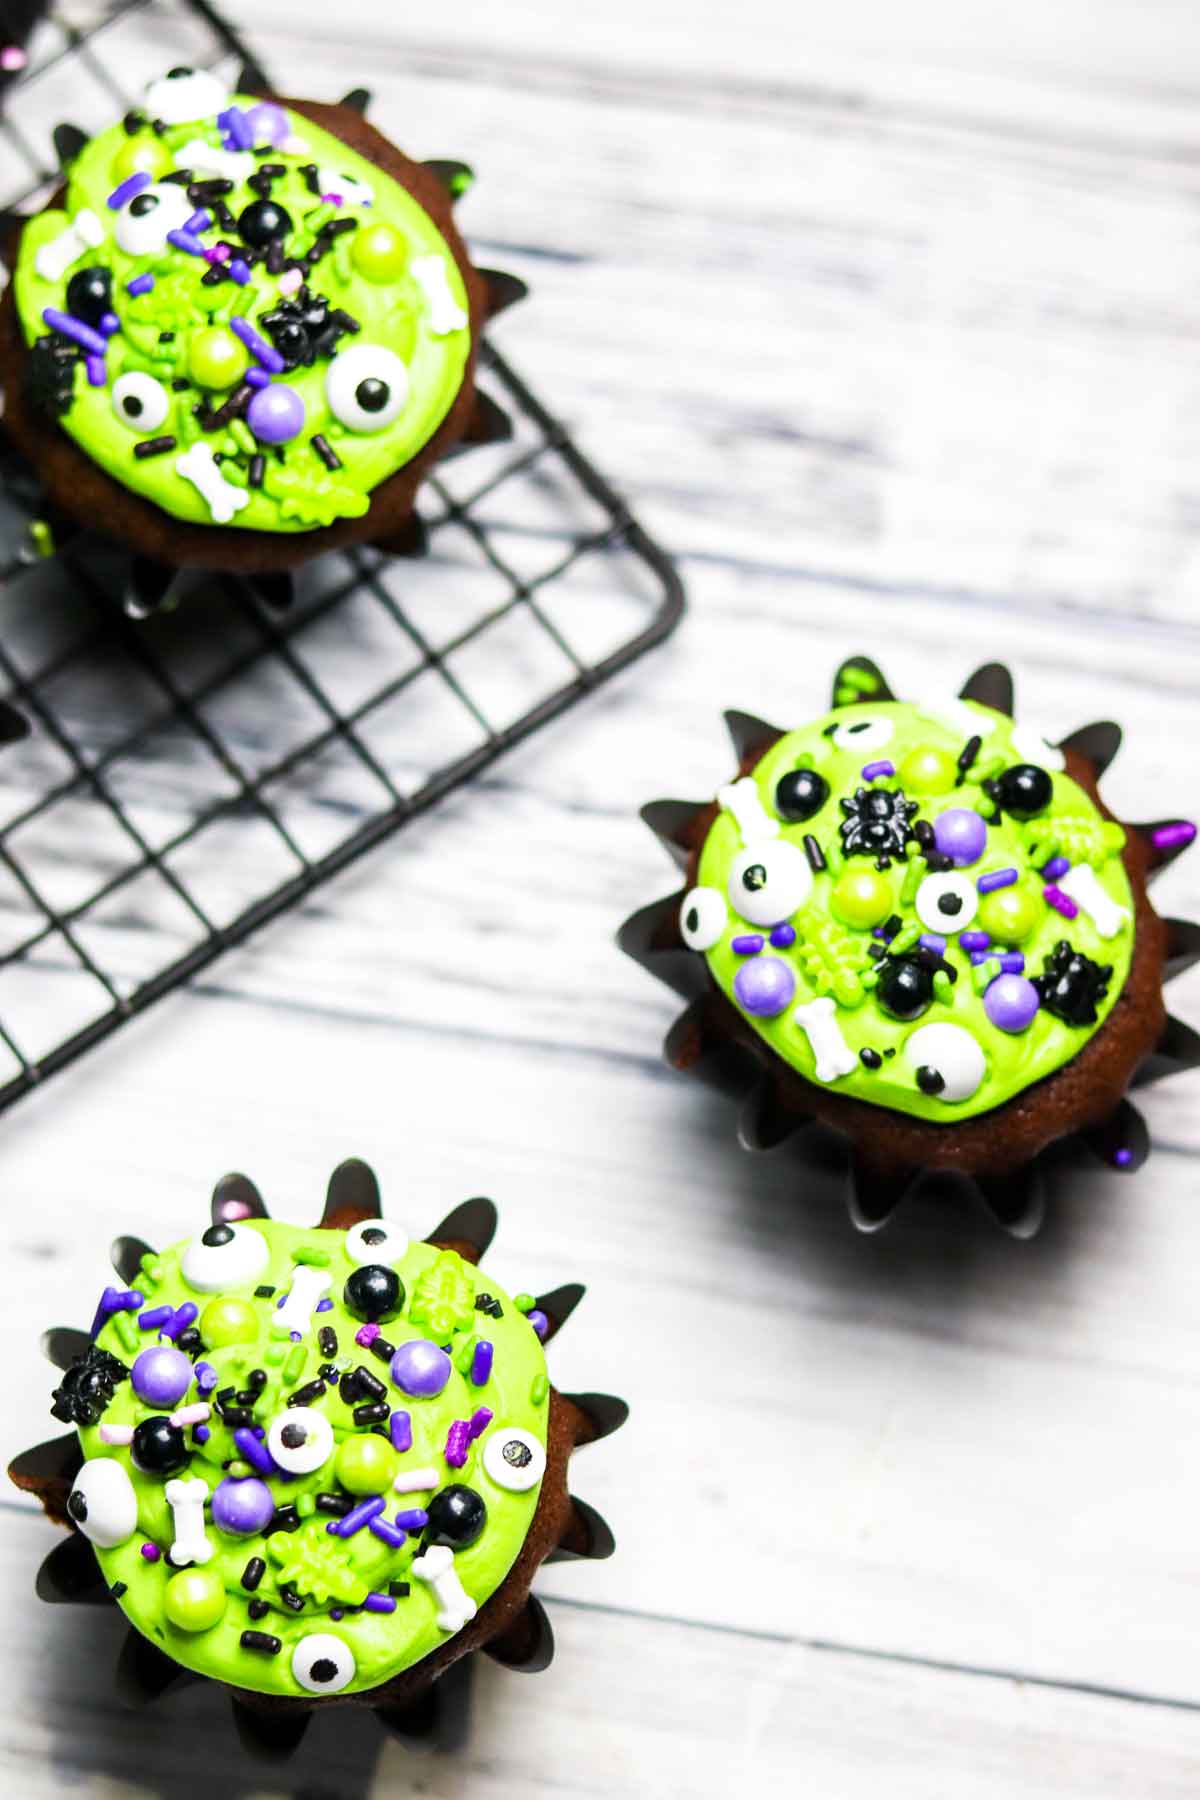 Three Chocolate Caramel Filled Cupcakes on a Cooling Rack Decorated for Halloween